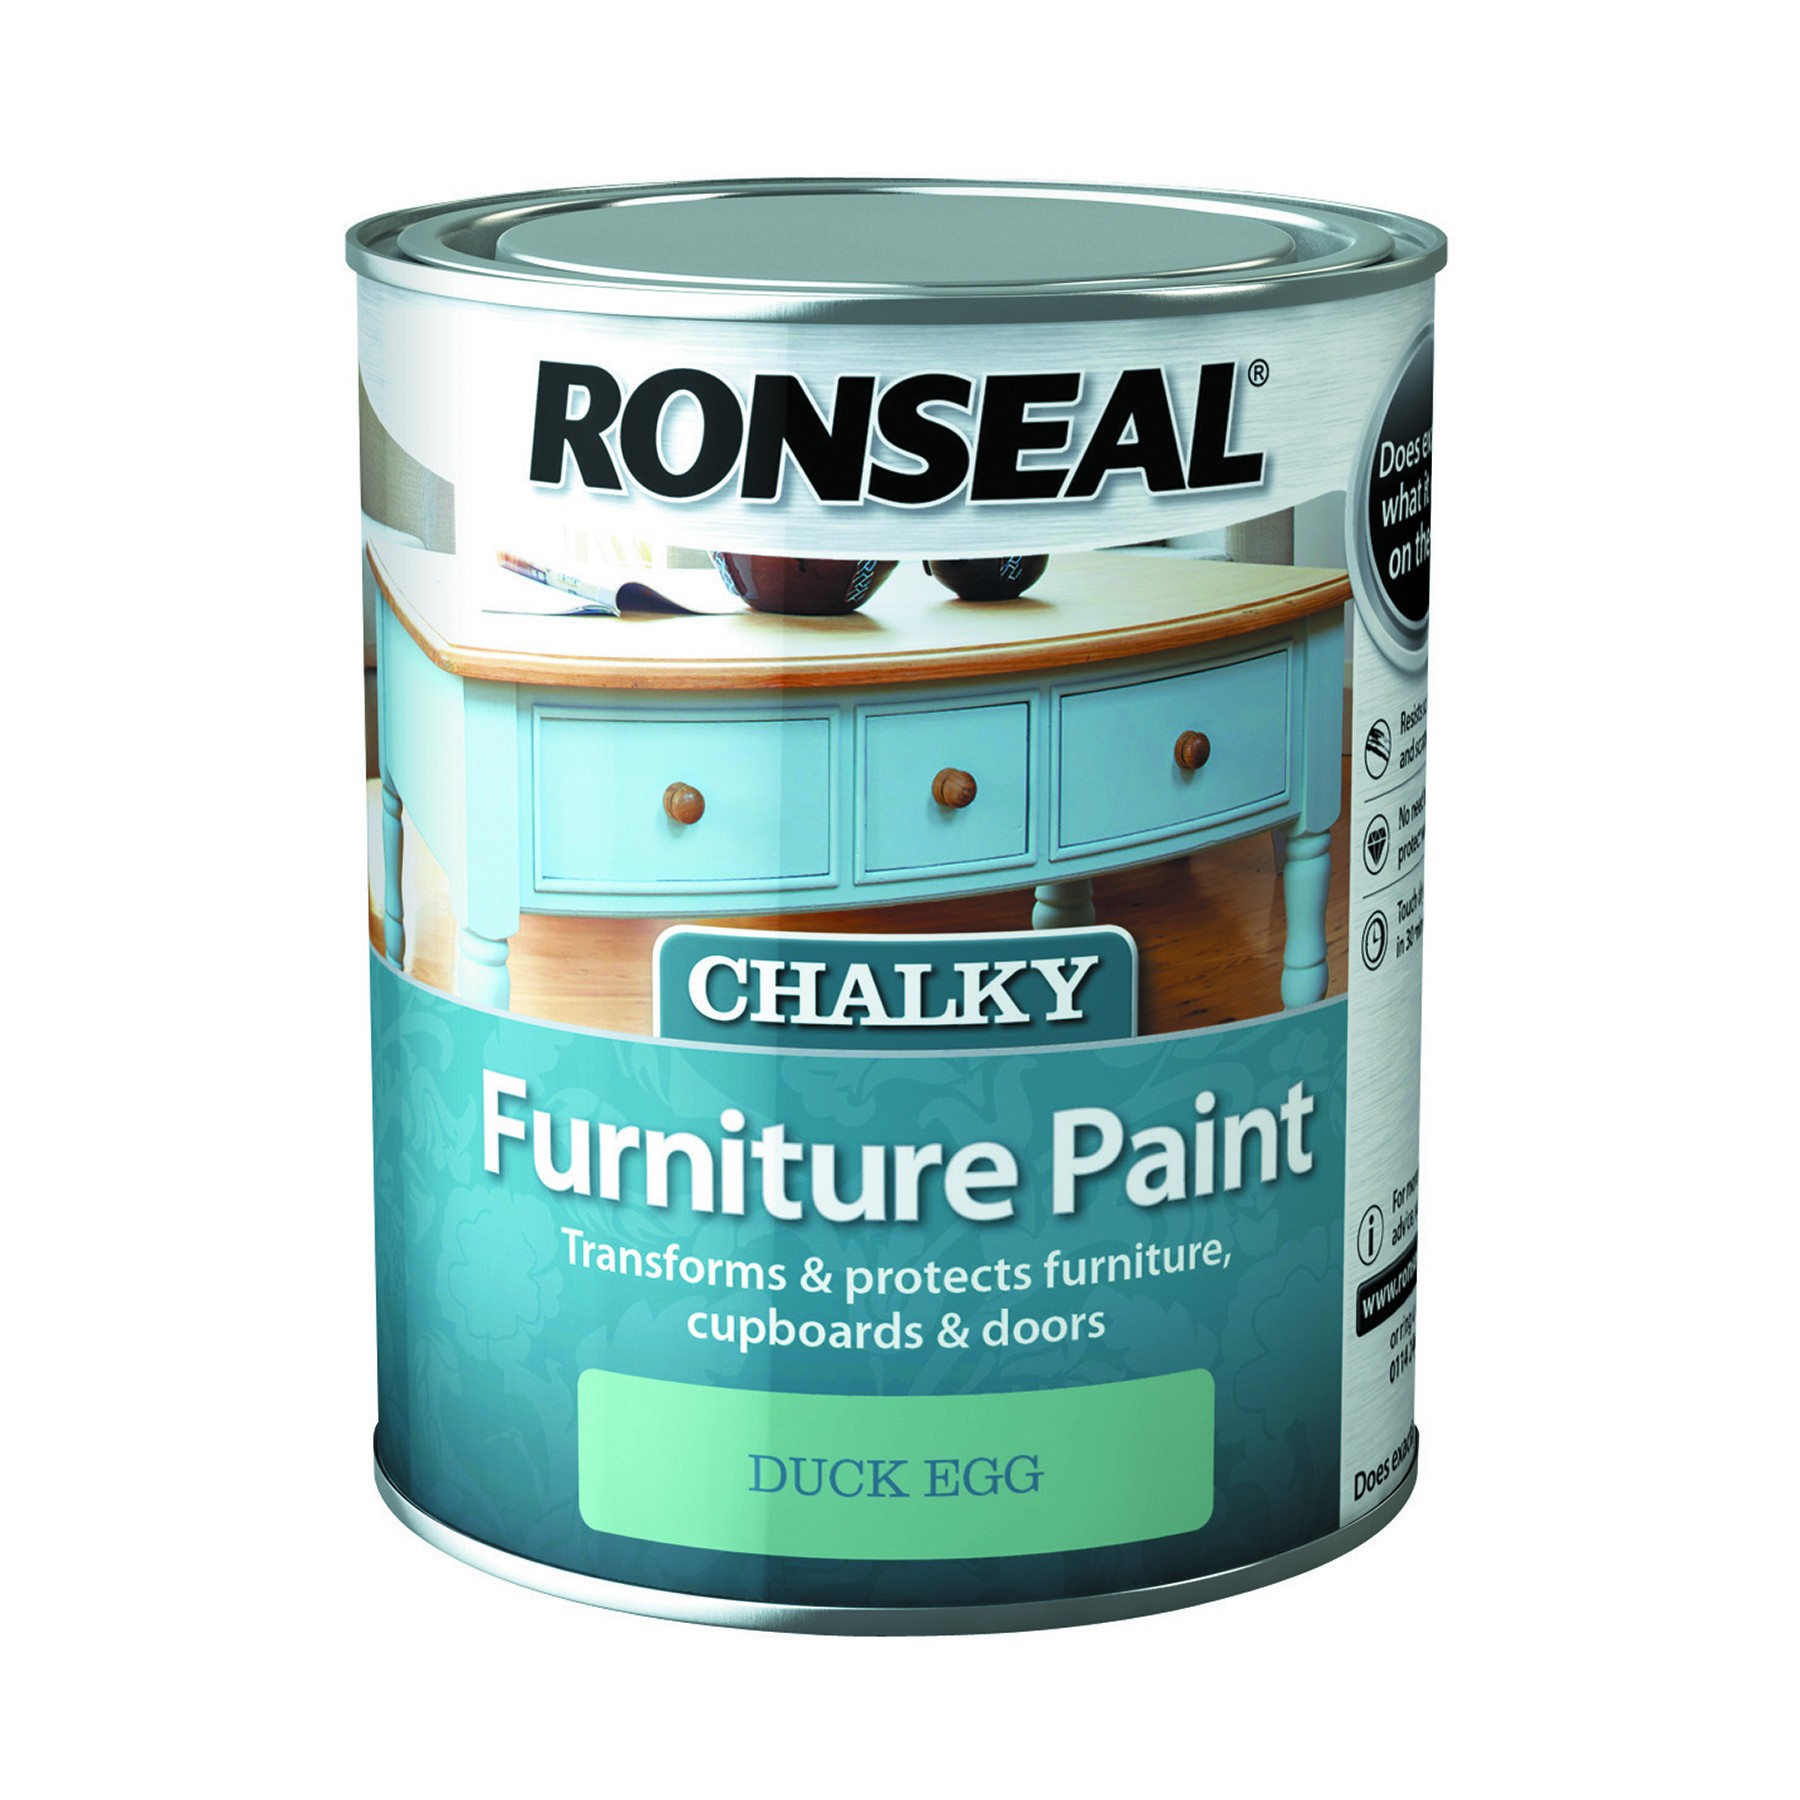 Ronseal Chalky Furniture Paint 750ml Country Cream [RGS37483]